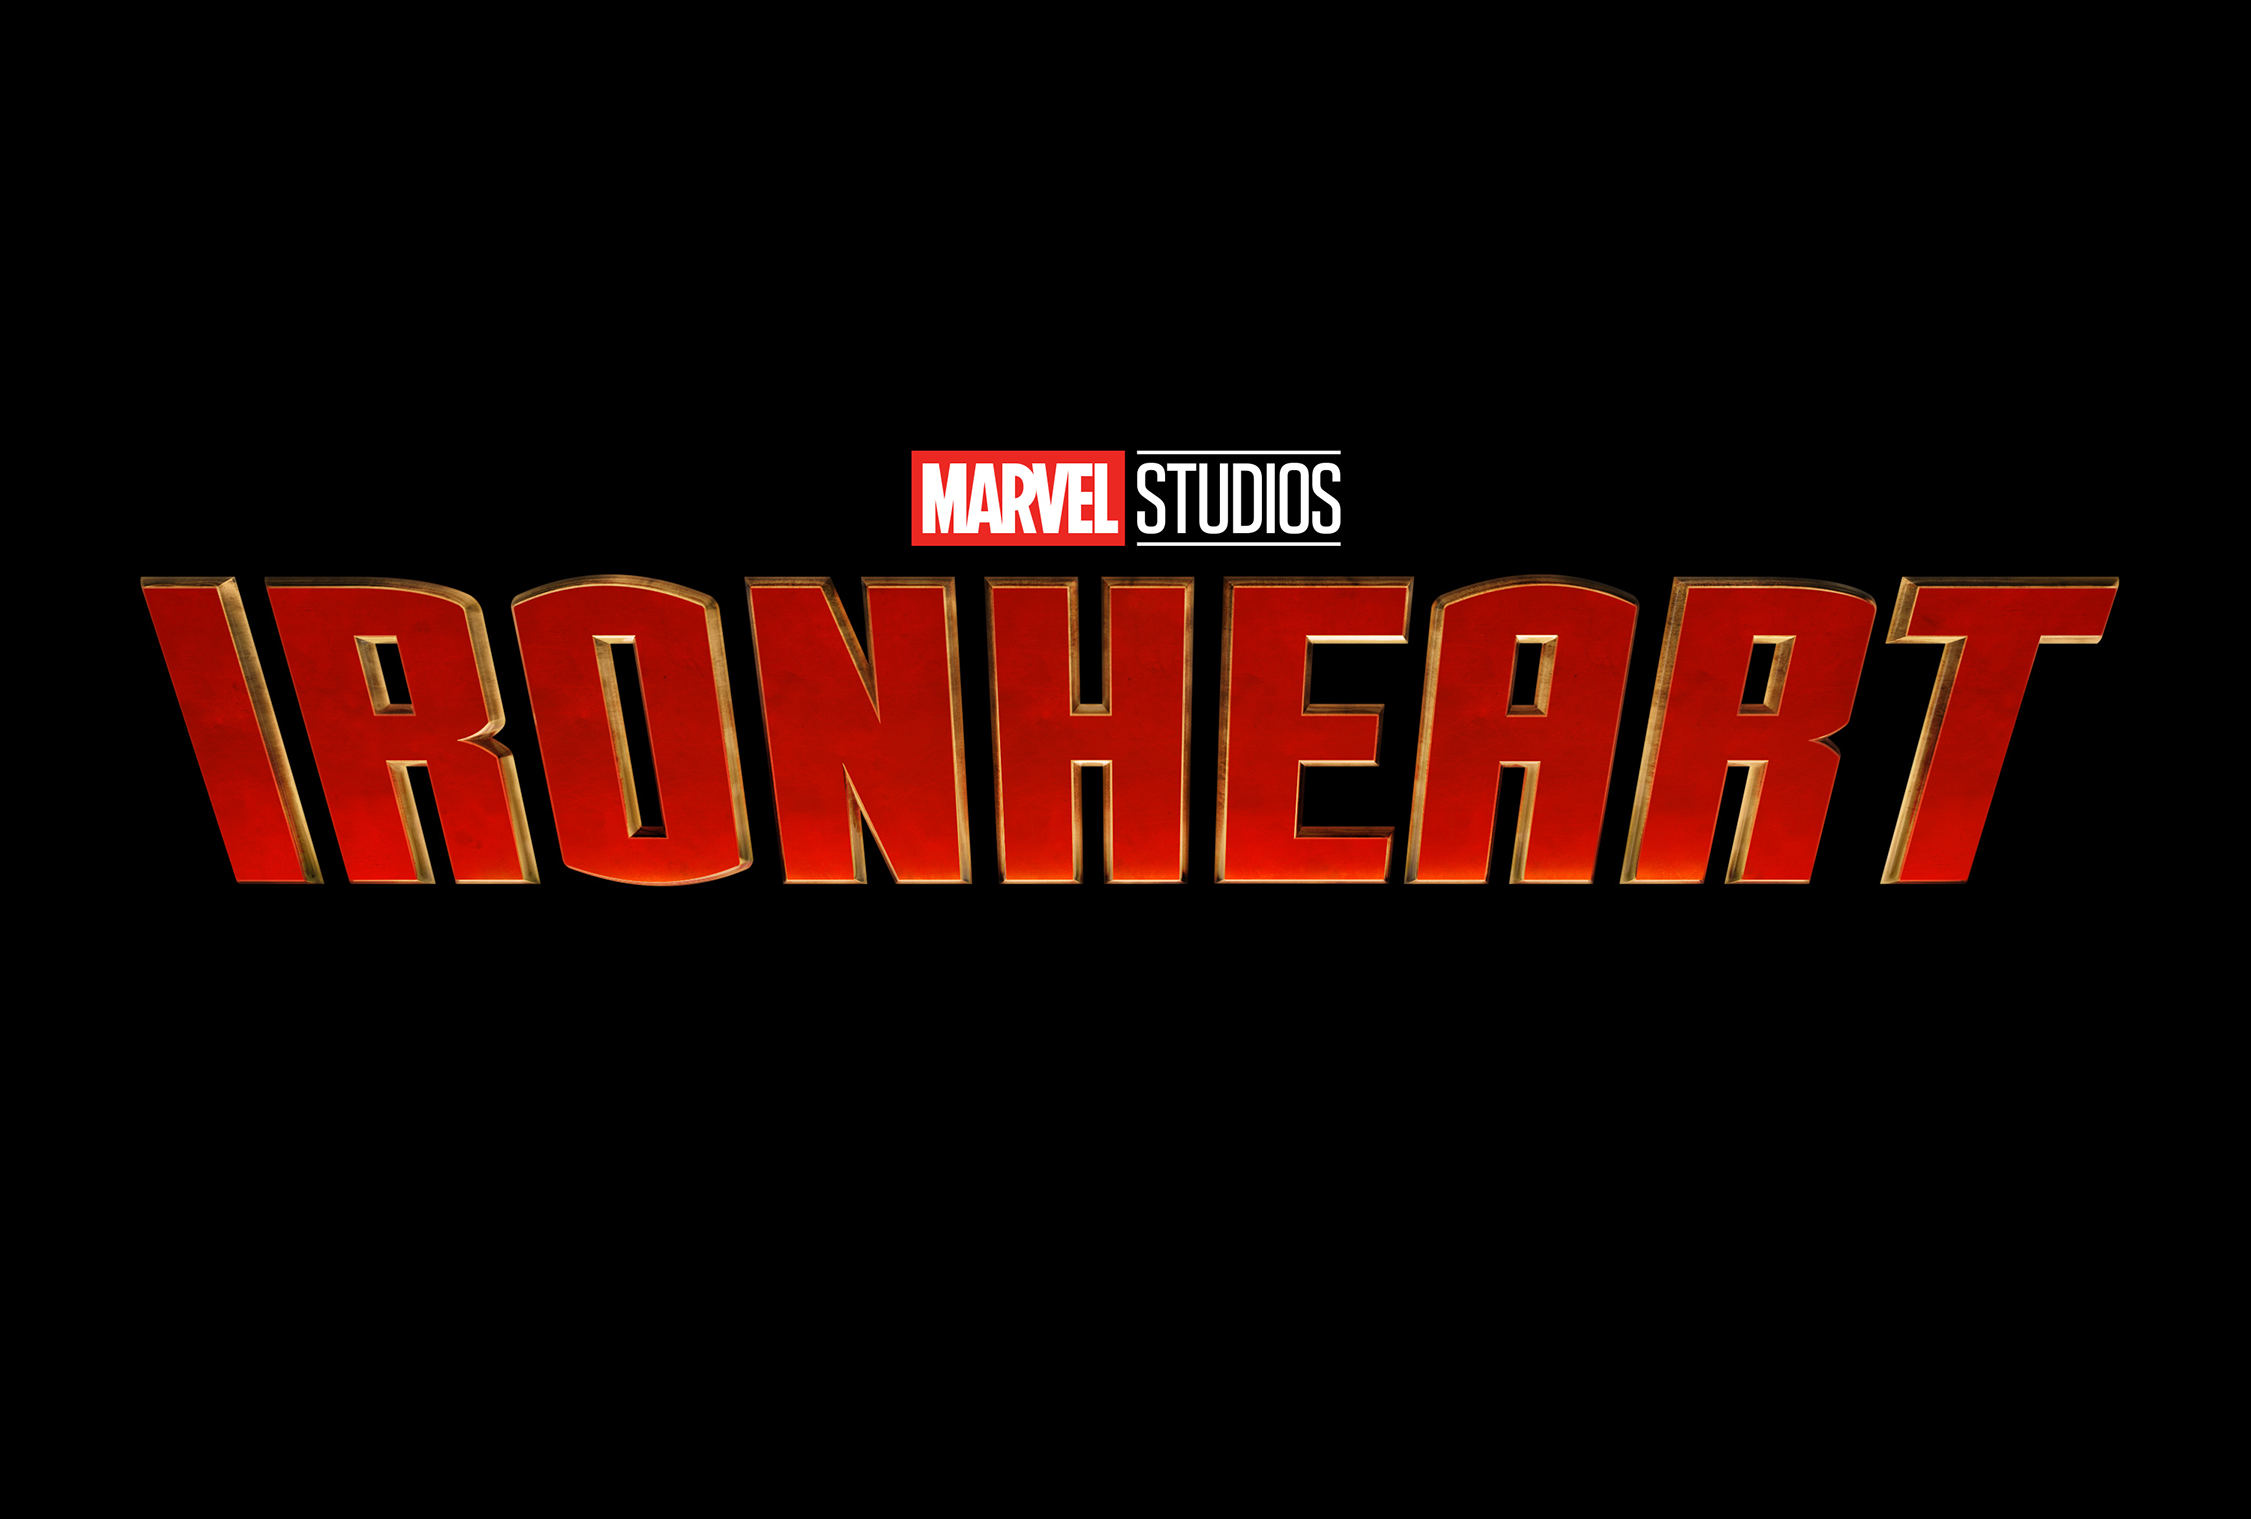 Working Title For Disney Plus ‘Ironheart’ Revealed | Barside Buzz